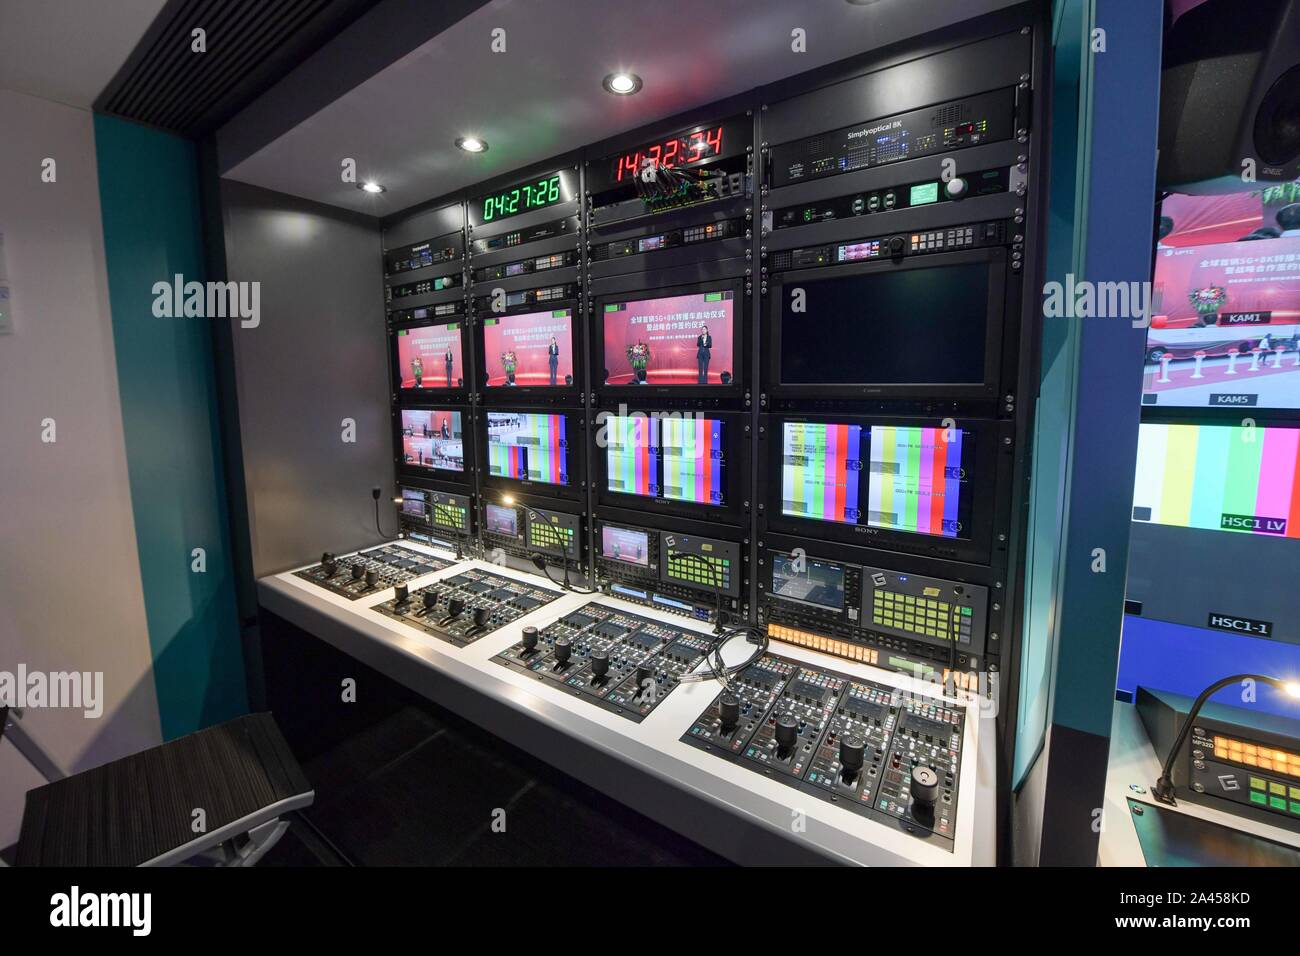 Interior view of China's self-designed broadcast van based on 5G and 8K ultra high definition (UHD) technology in Beijing, China, 18 August 2019. Chin Stock Photo